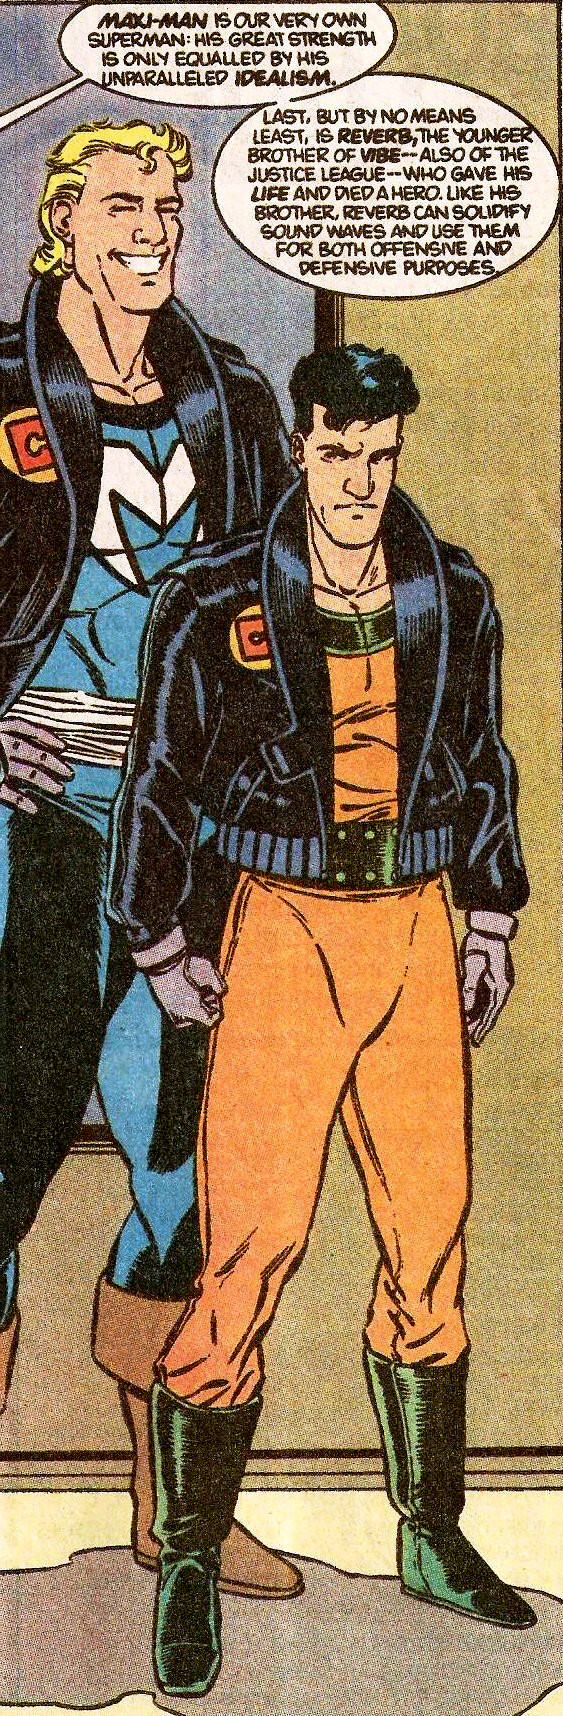 From Justice League Quarterly #1 (1990)